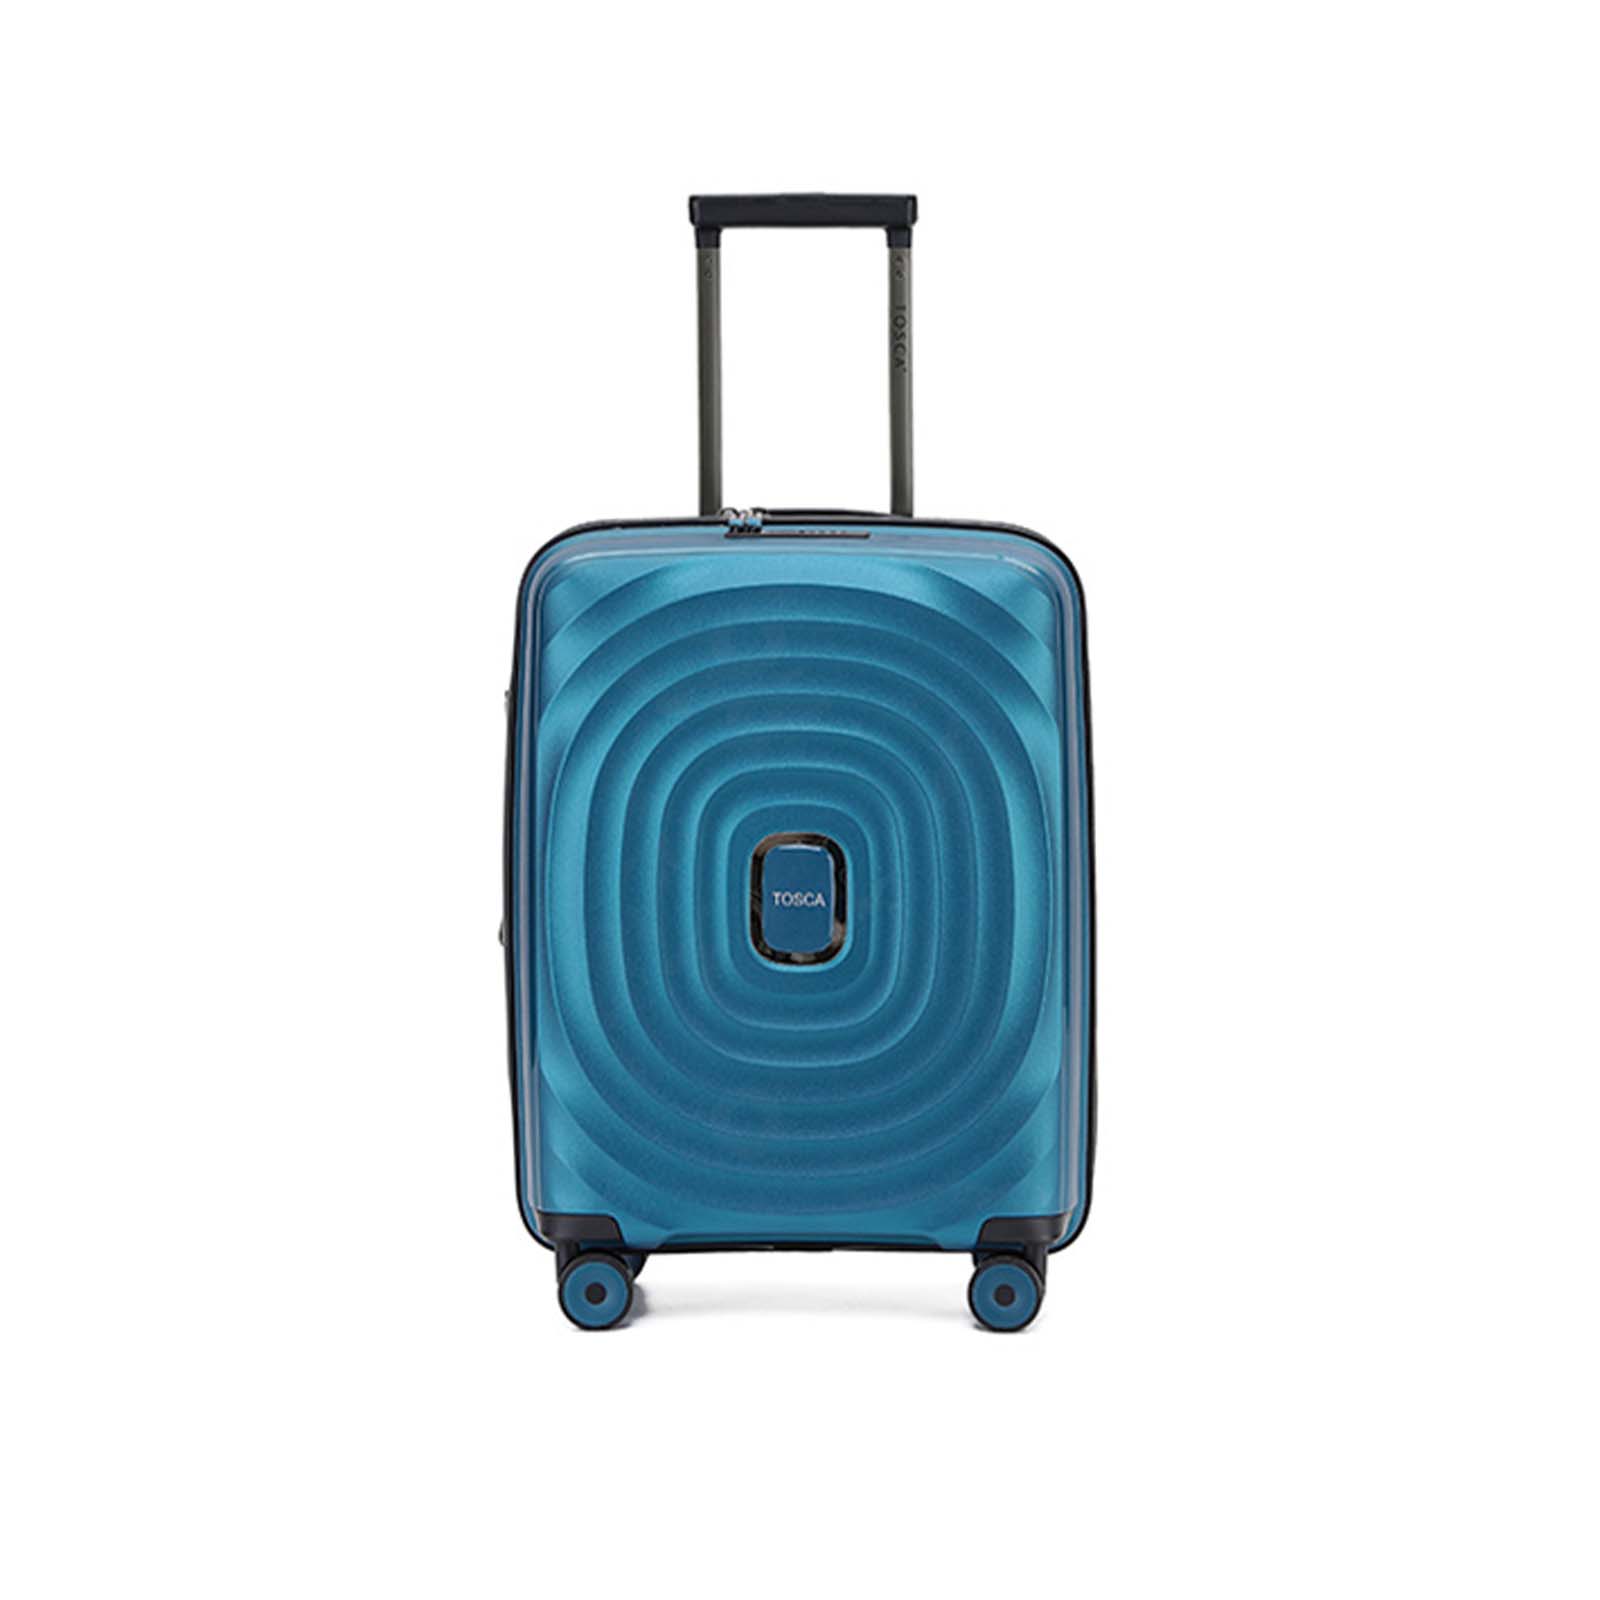 tosca-eclipse-4-wheel-55cm-carry-on-suitcase-blue-front